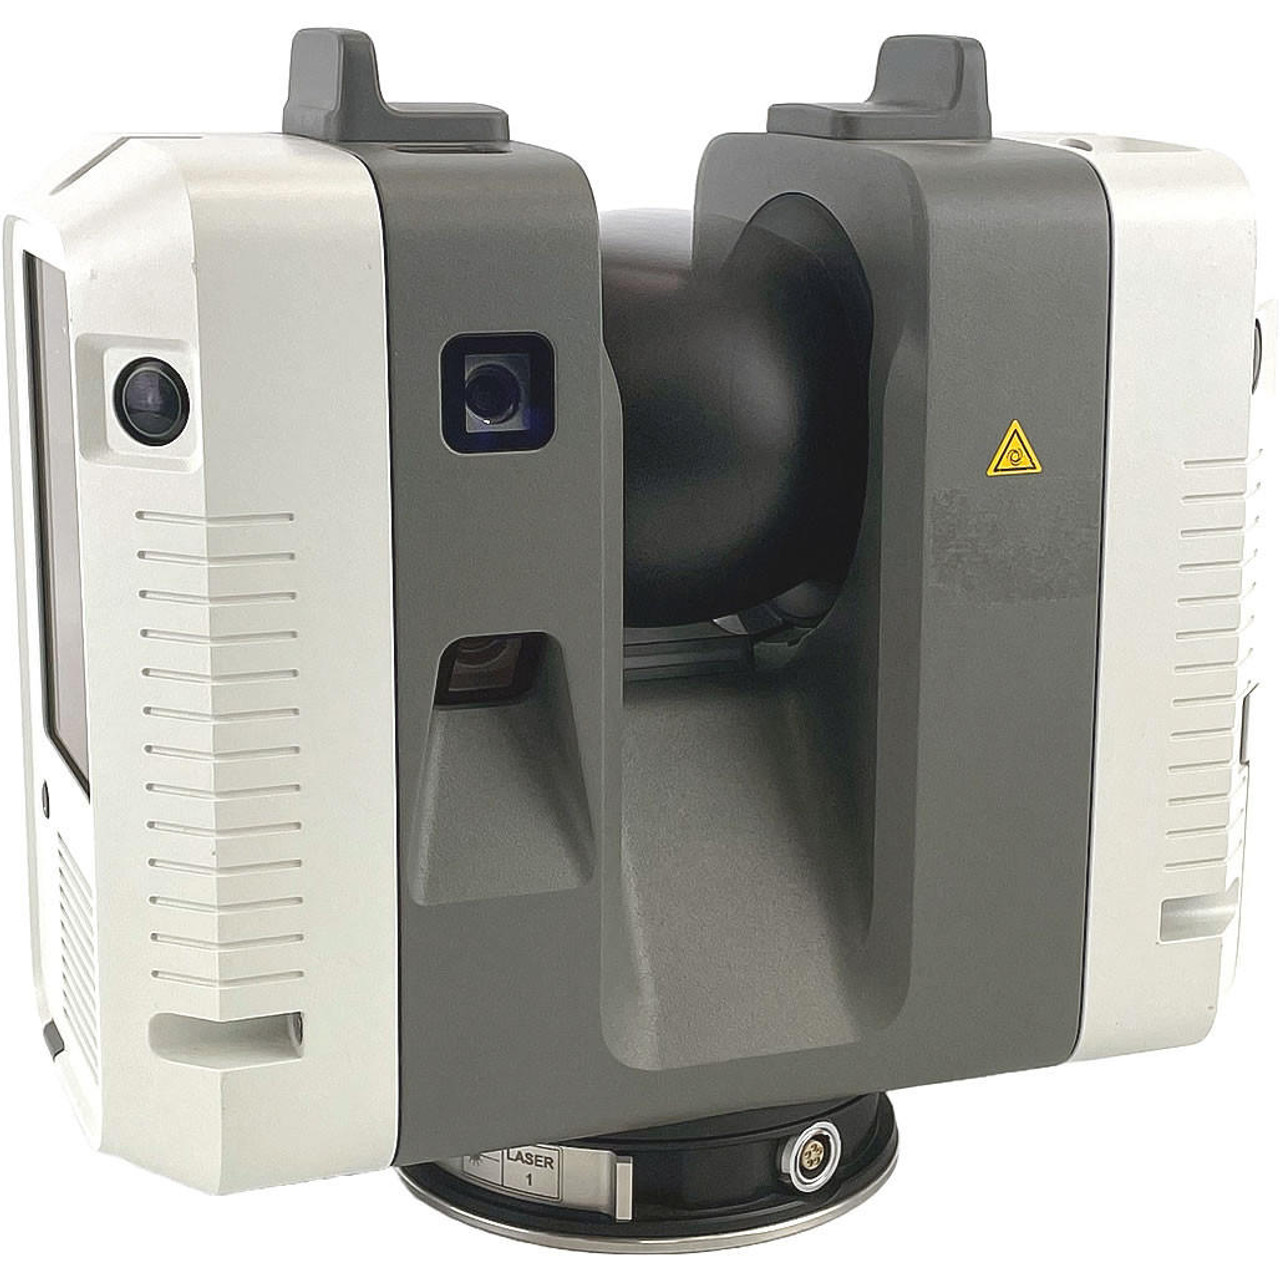 Leica RTC360 3D Laser Scanner - Used